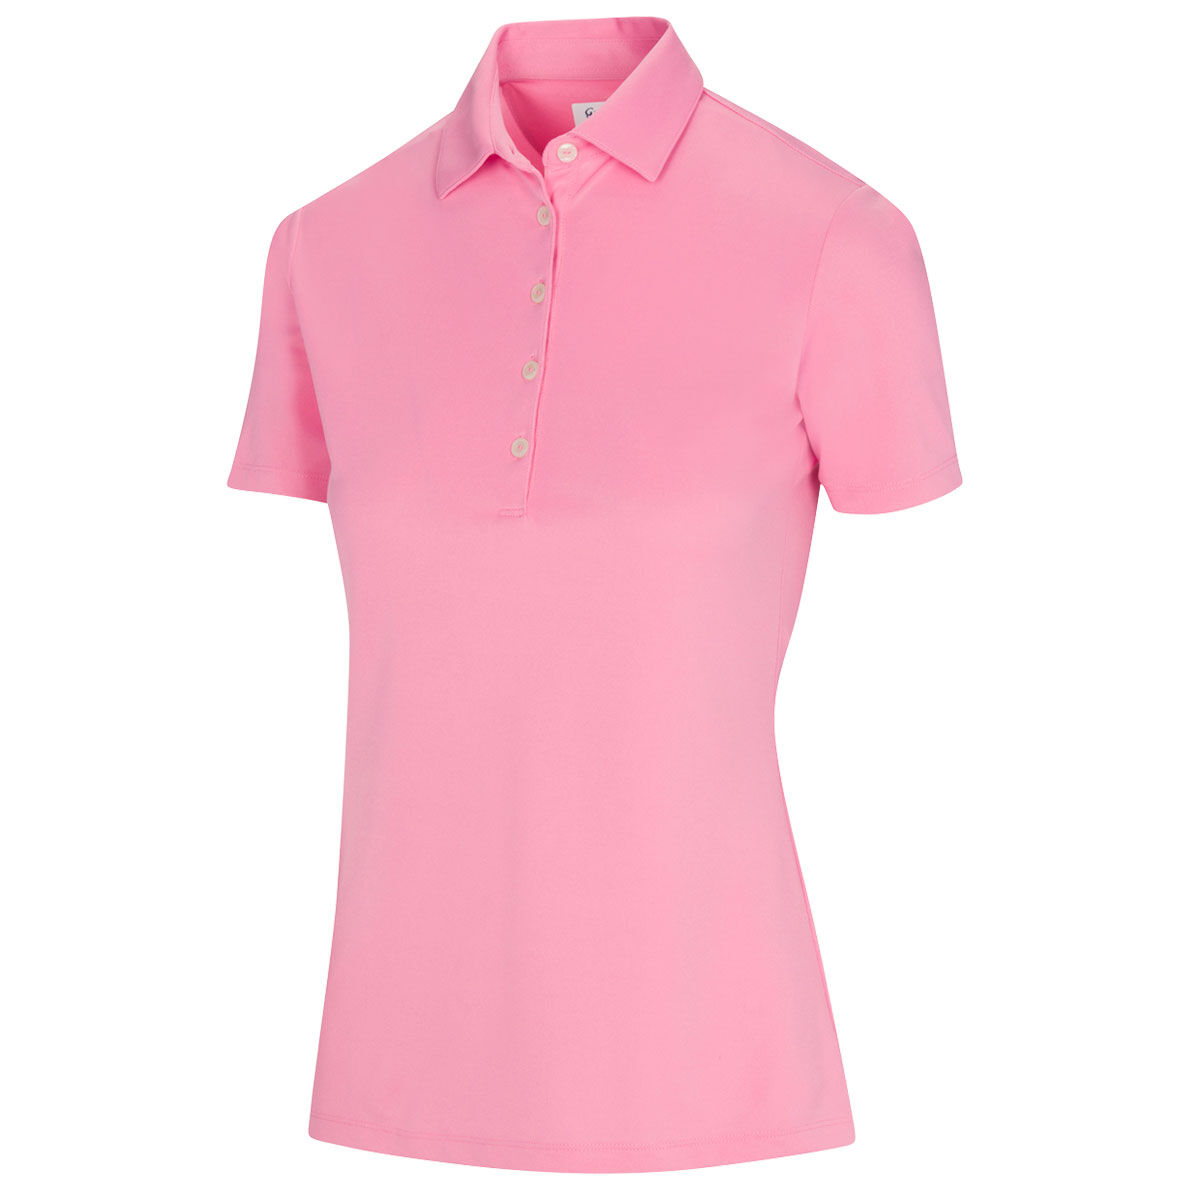 Greg Norman Rose Pink Embroidered Shark Logo Golf Polo Shirt, Size: Small | American Golf